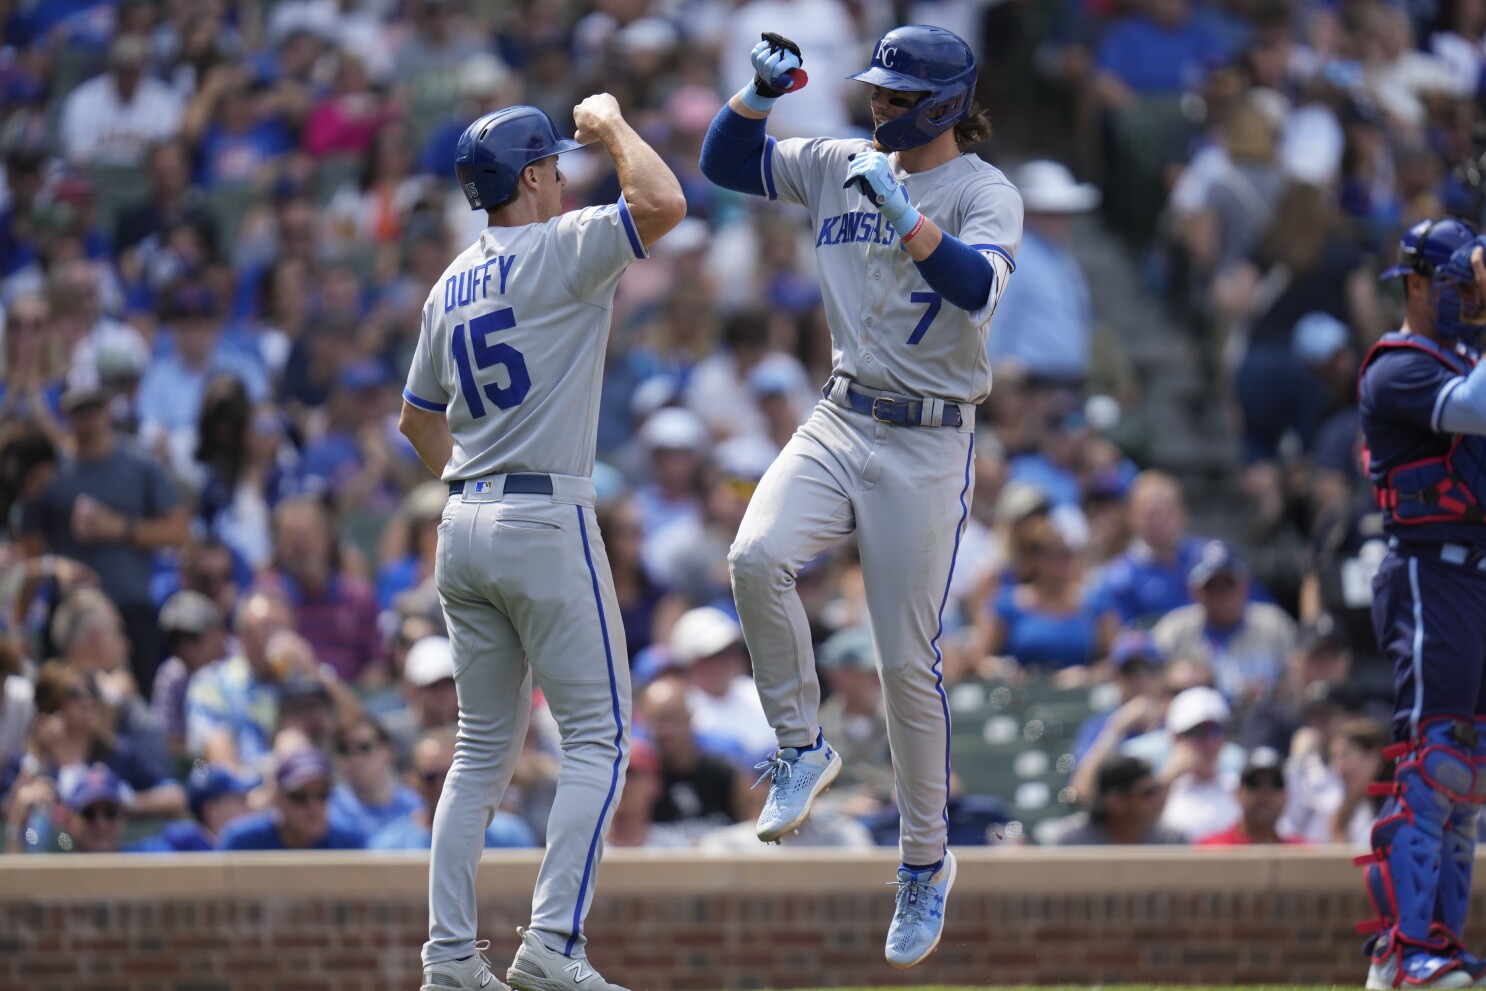 Bobby Witt Jr. hits go-ahead homer and Royals end skid with 4-3 win vs Cubs